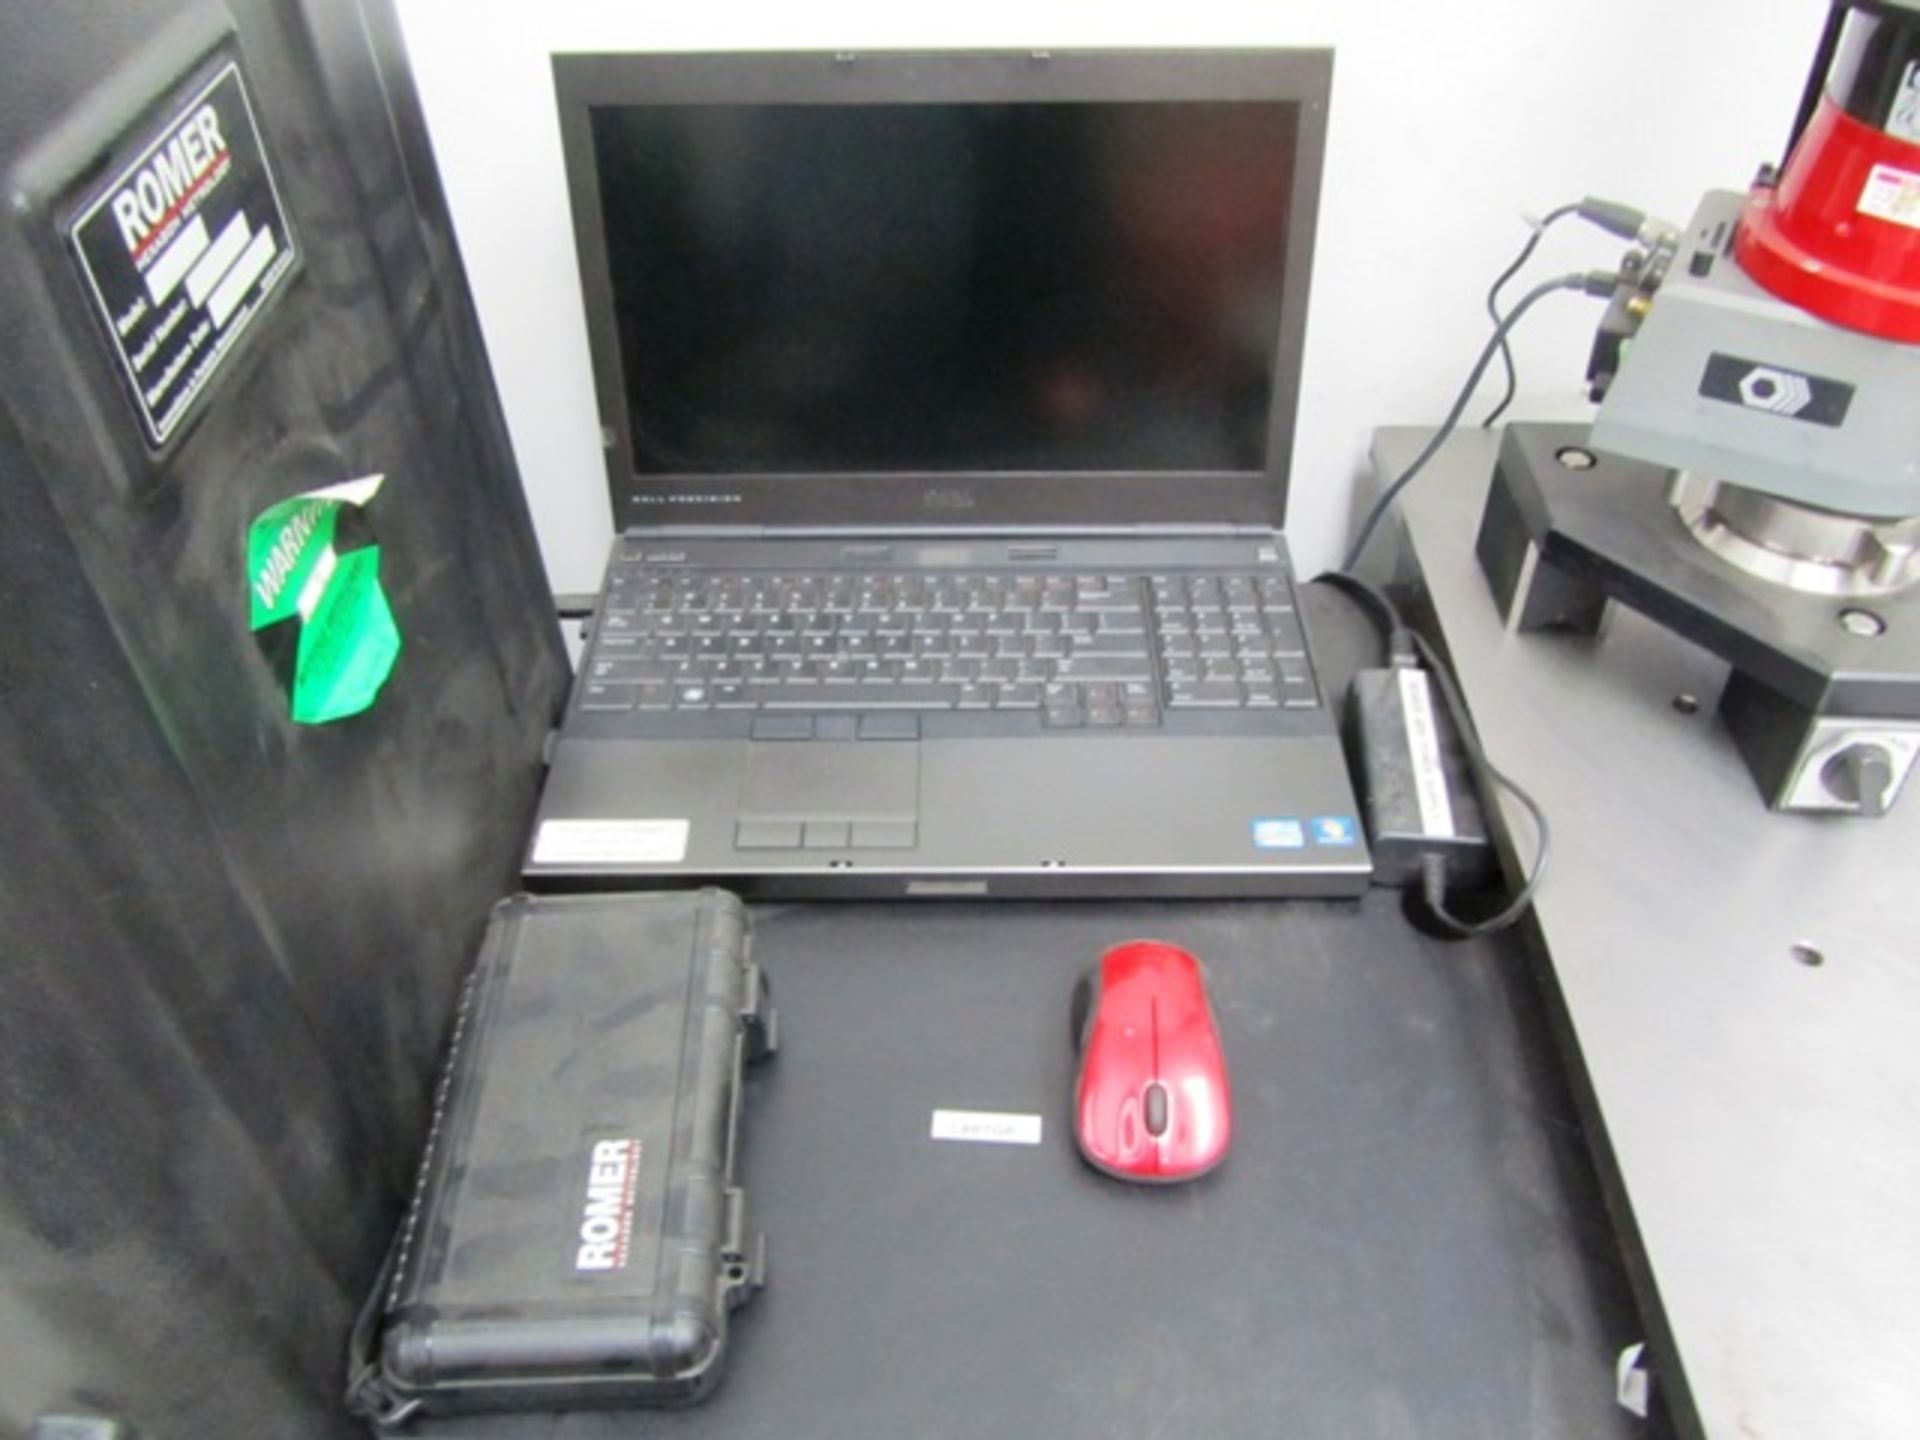 Romer Model 5118 Infinite 2.0 Portable Coordinate Measuring Machine with PC-DMIS Software, Laptop - Image 3 of 3